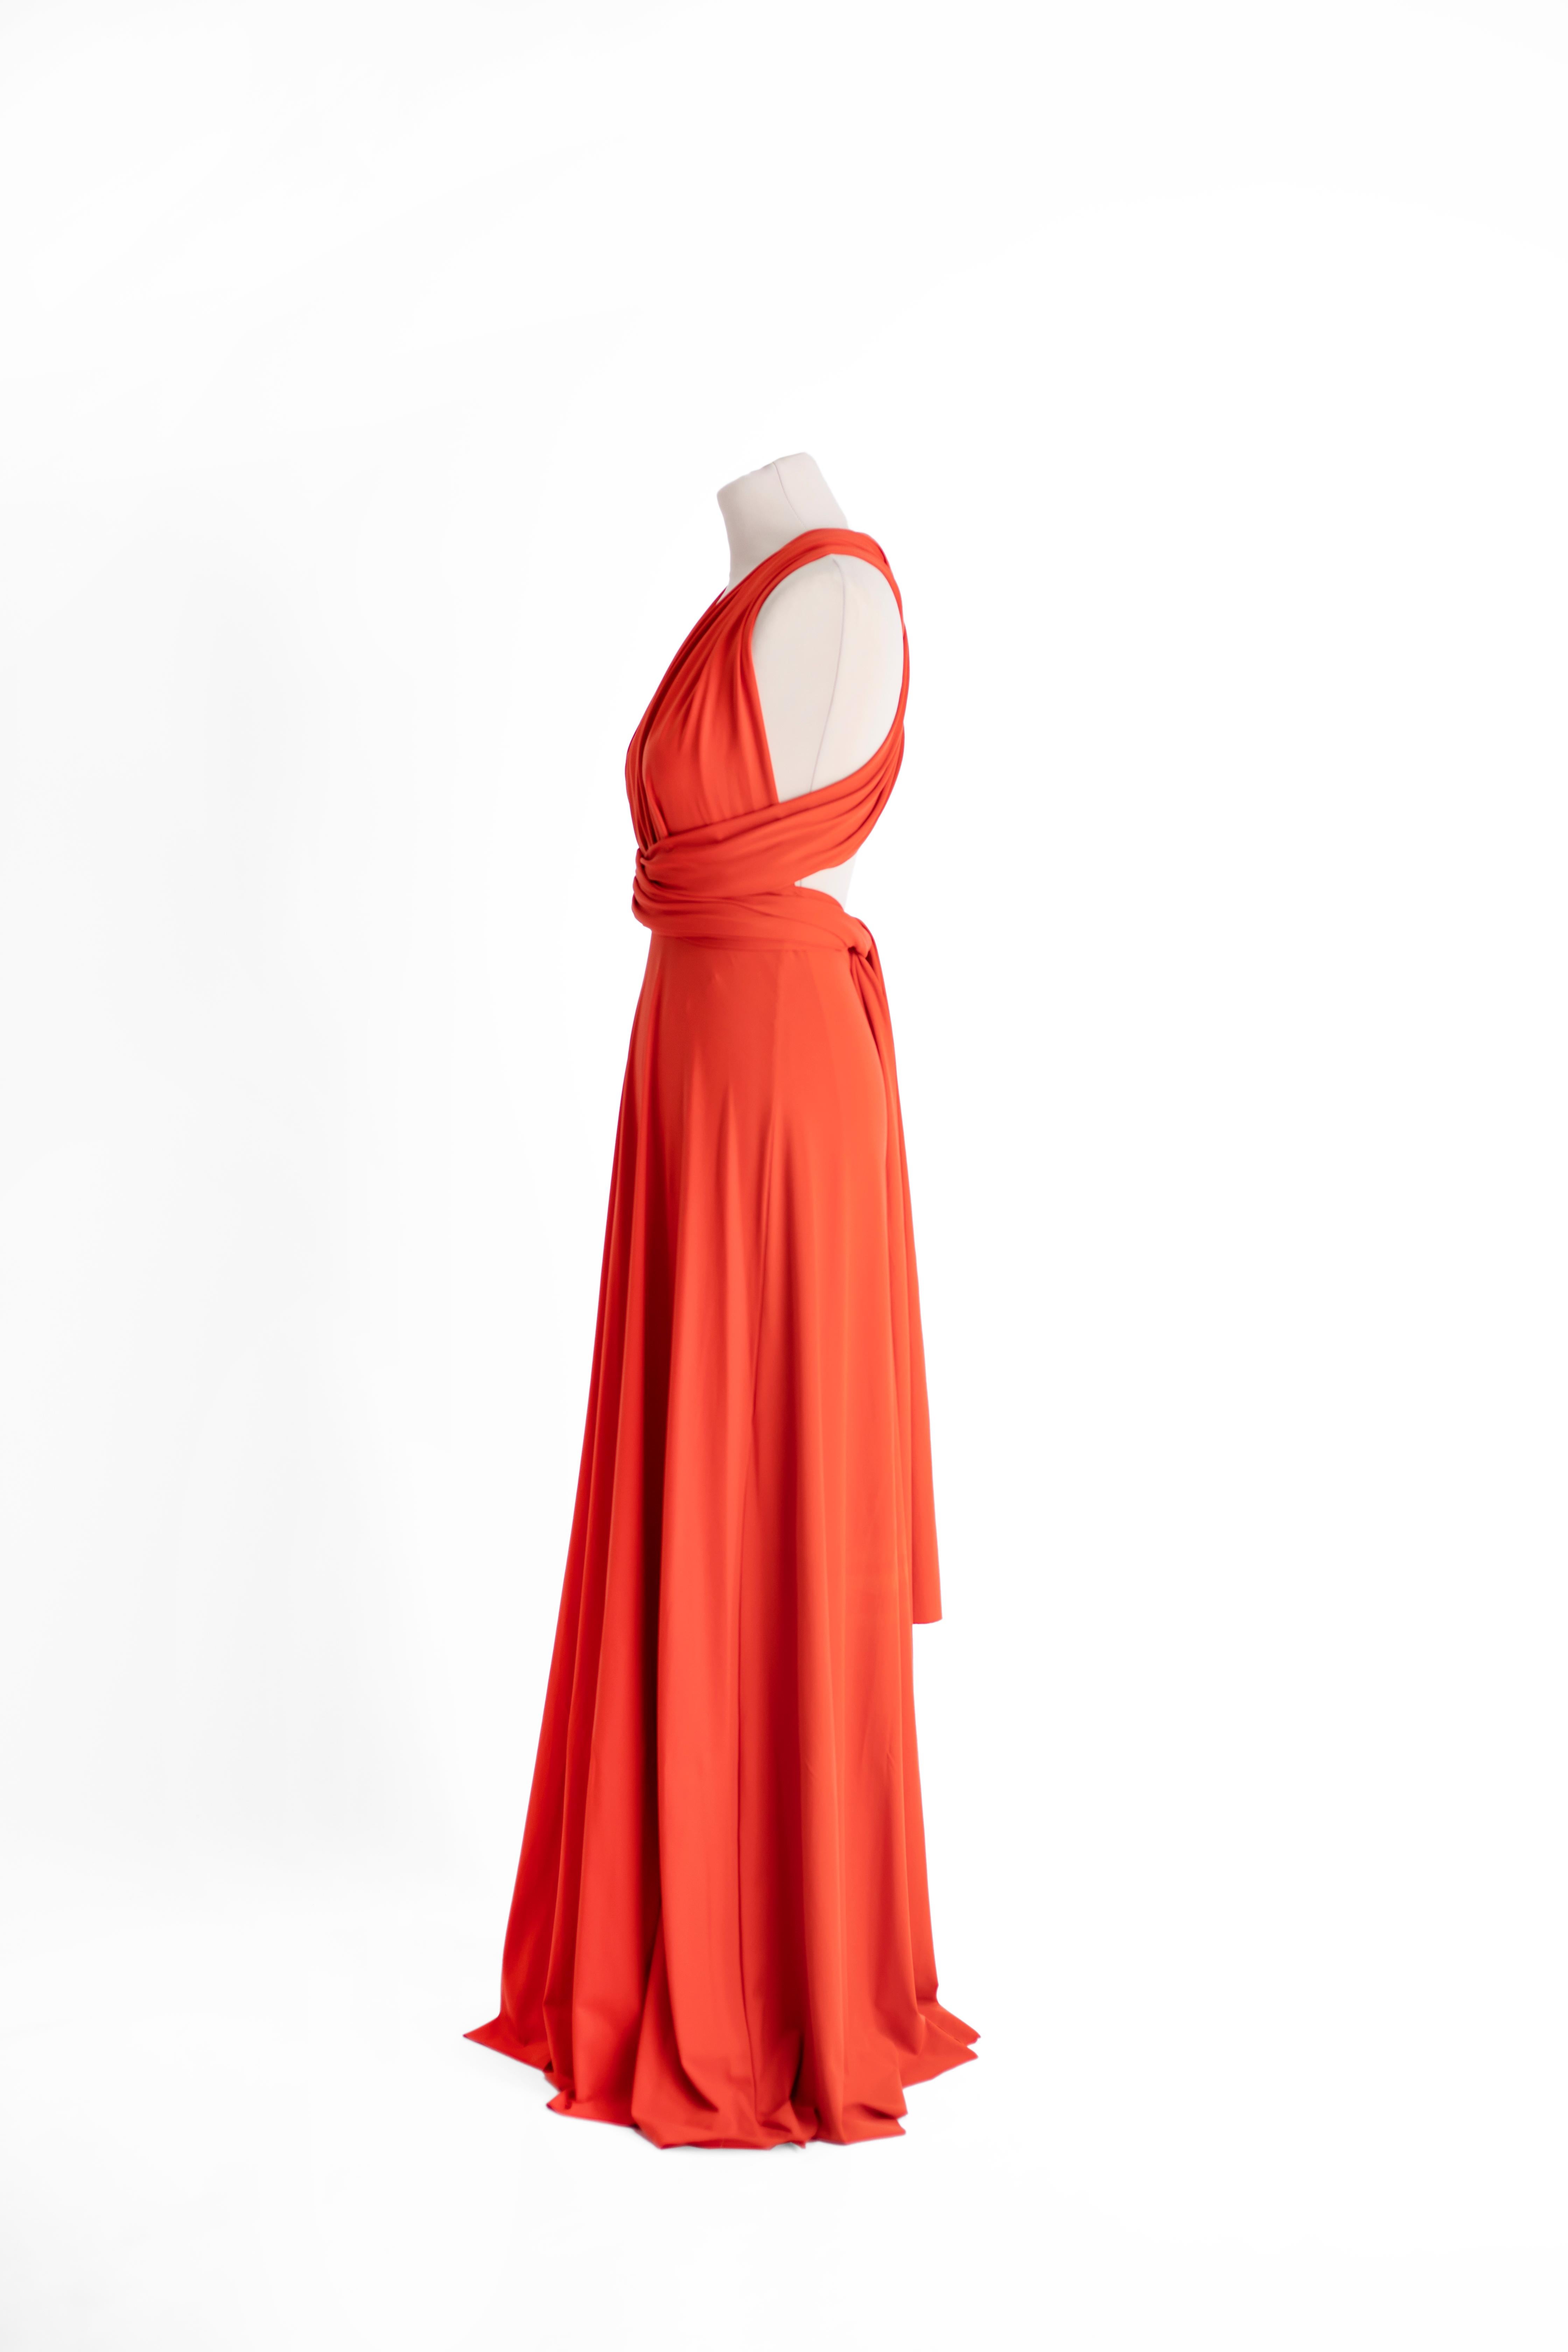 Long summer dress, bodice made of fabric bands to cross at the waist. Coral orange fluid jersey fabric.

SIZE IT: S
SIZE USA: S